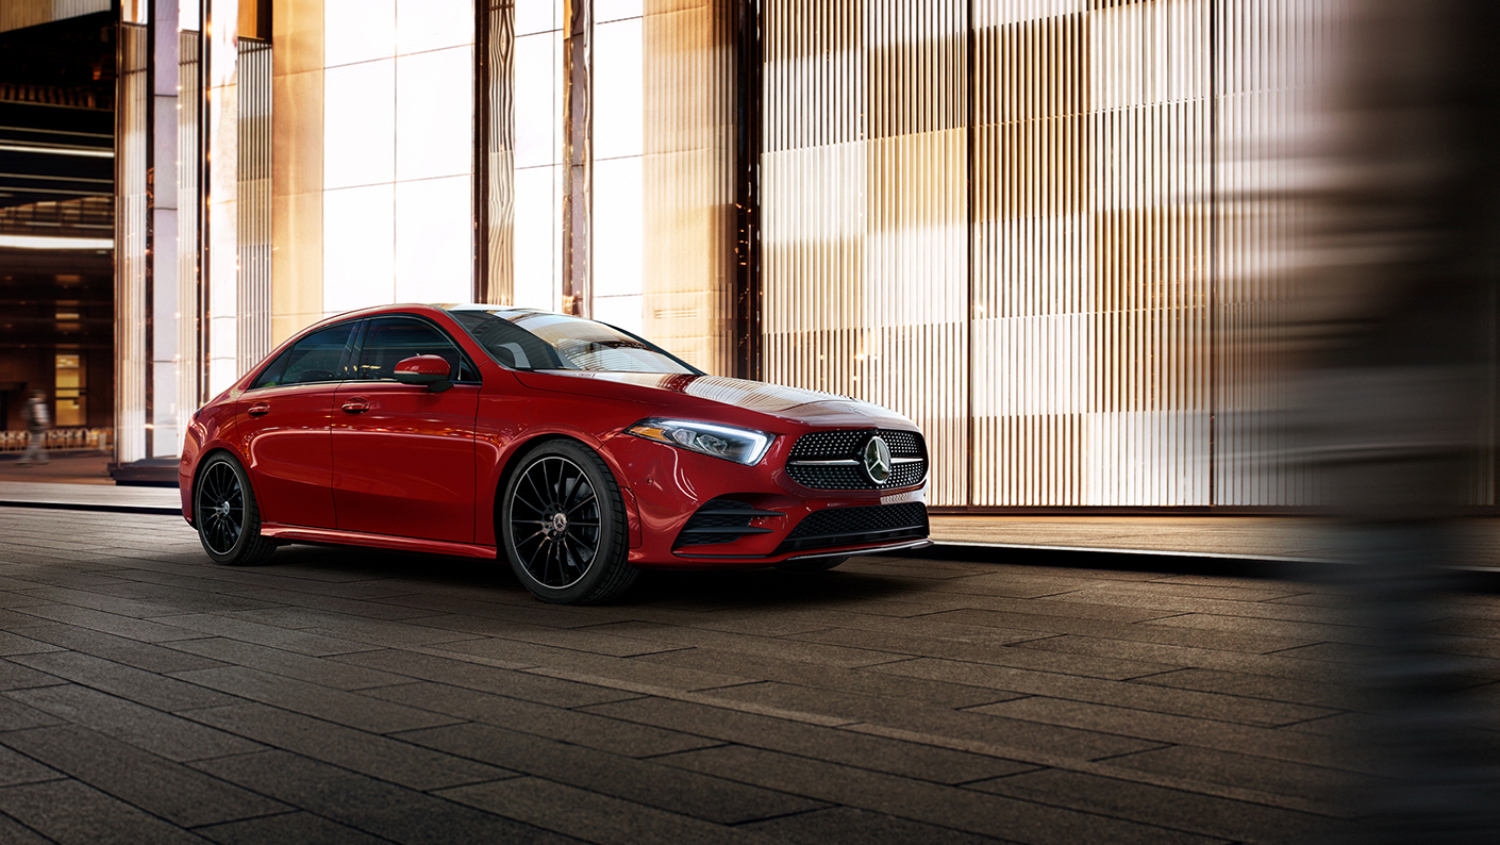 The 2021 Mercedes-Benz A-Class is on the Sedans & Coupes Buyer’s Guide 2021